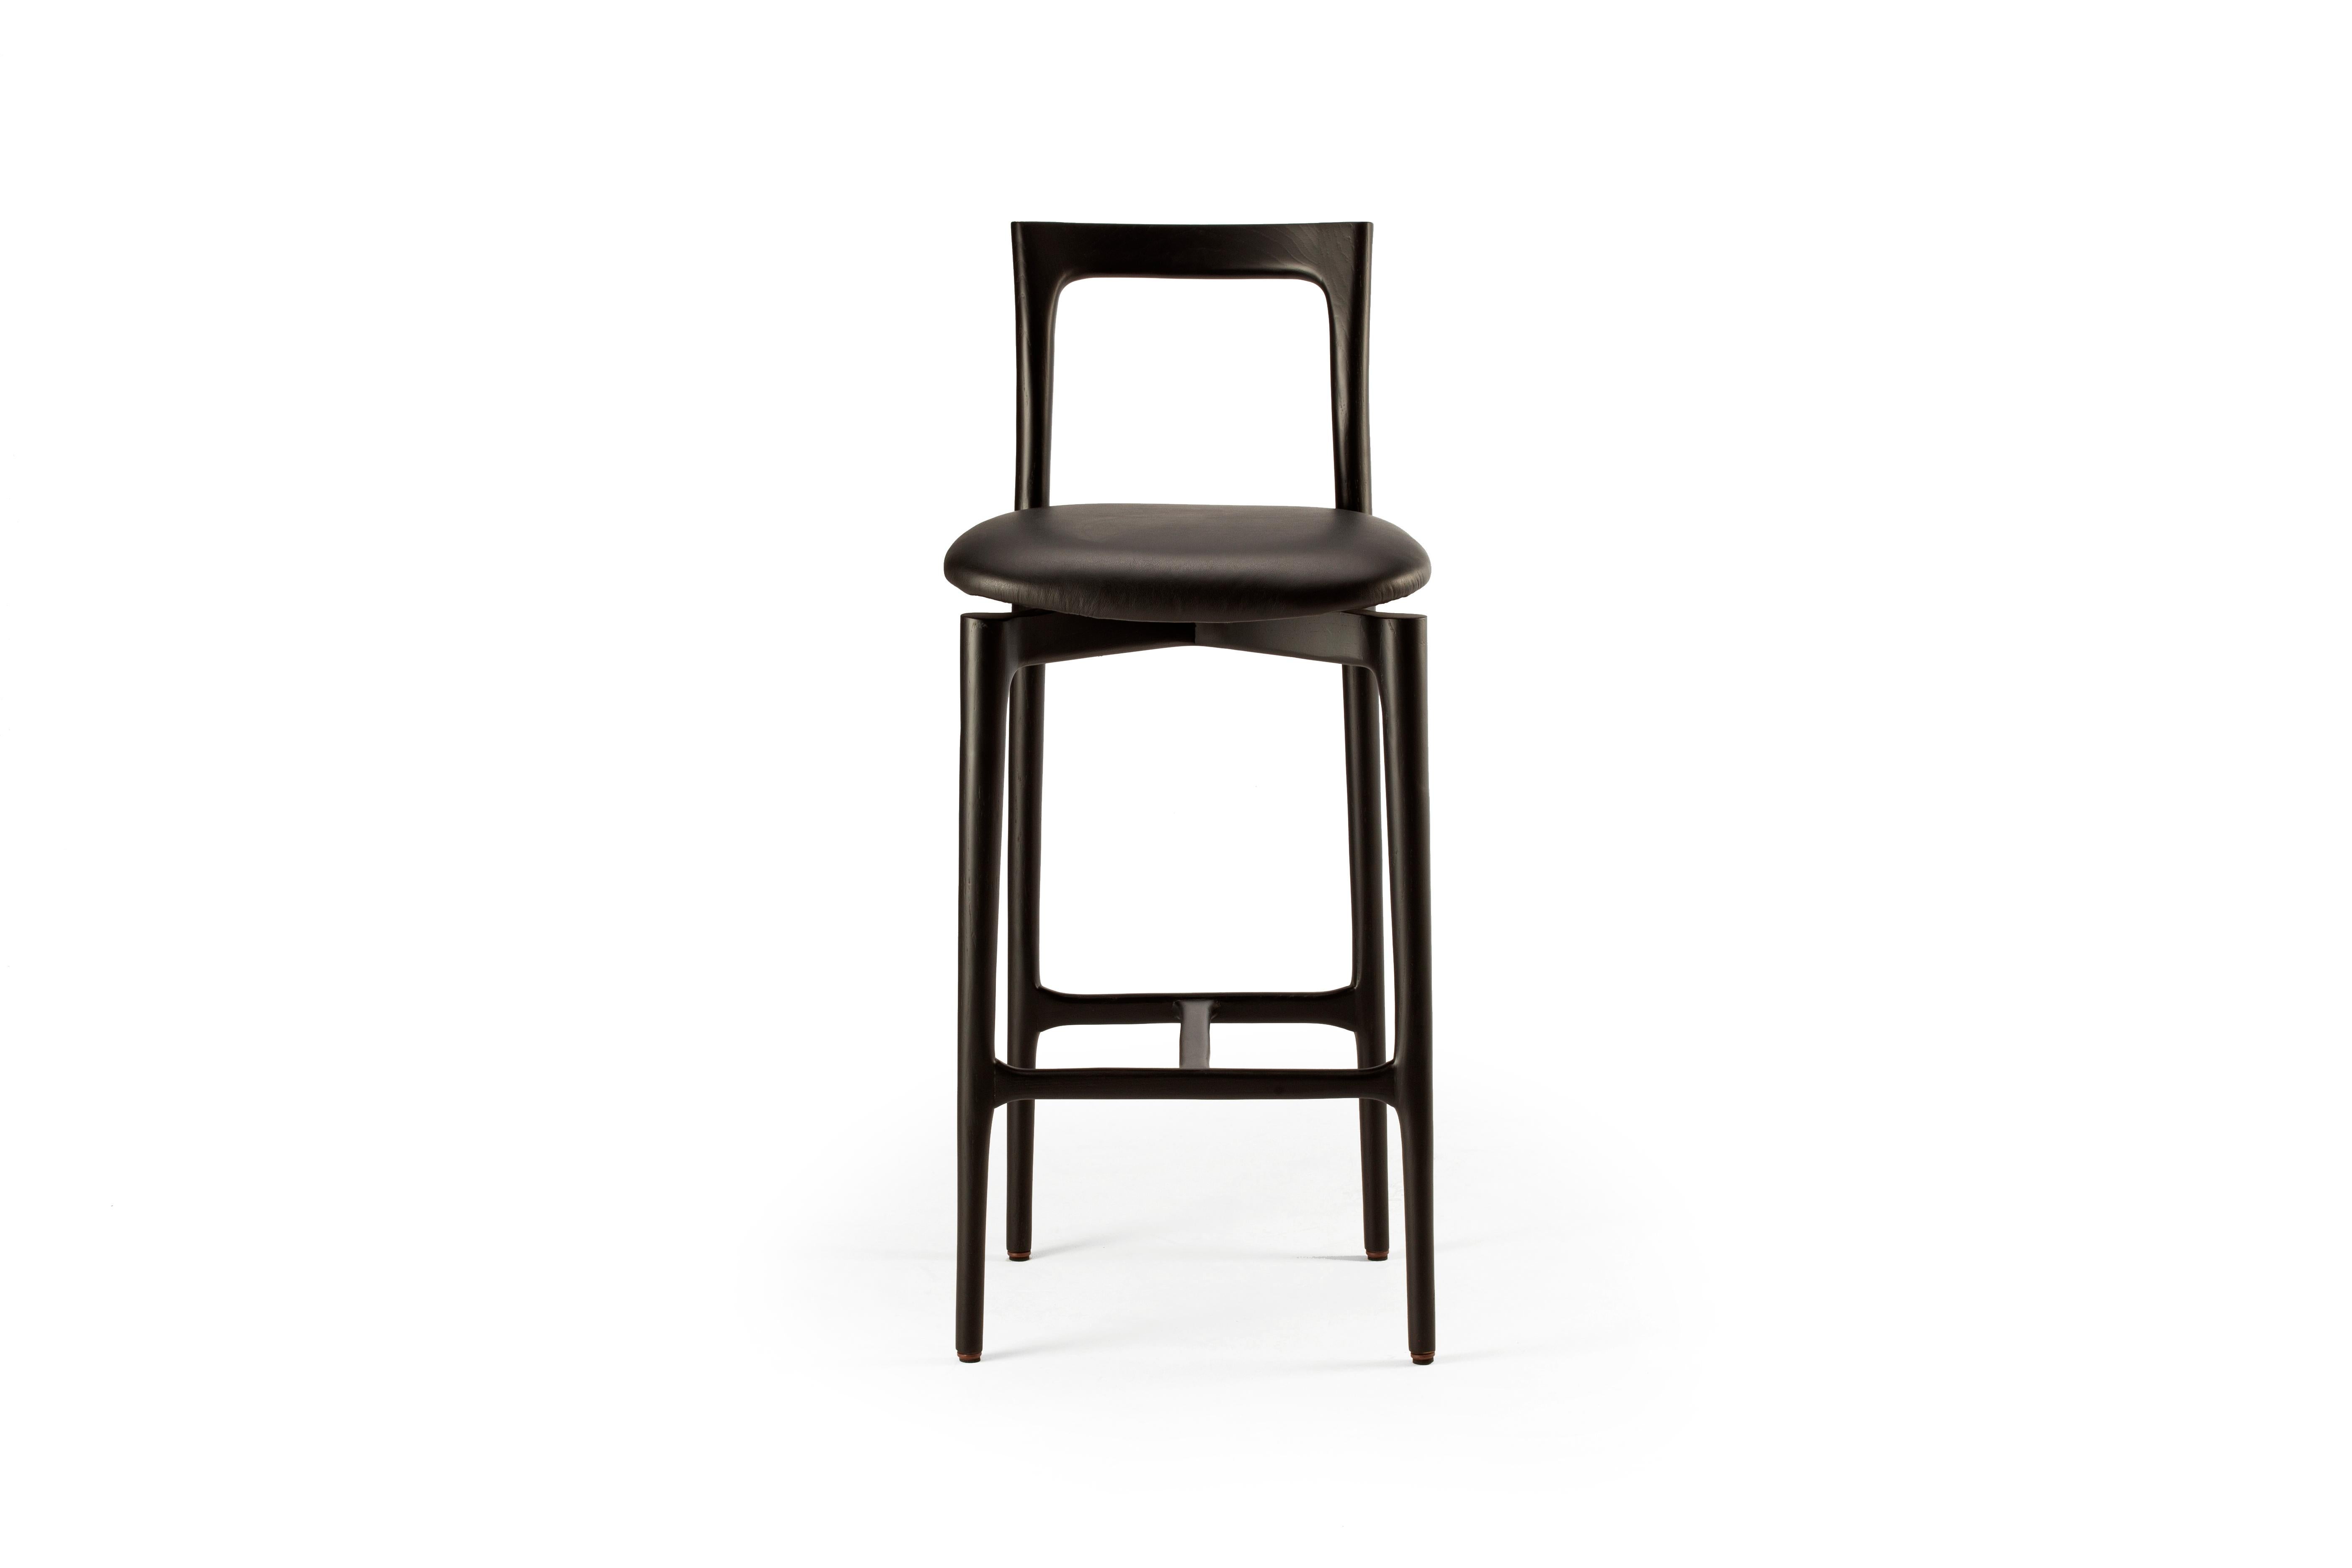 21st century Designed by Collector Studio grey bar chair leather

With a light solid wood structure, this bar chair is suitable for contemporary interiors, the bar chair’s proportions and reduction of material provides significant special